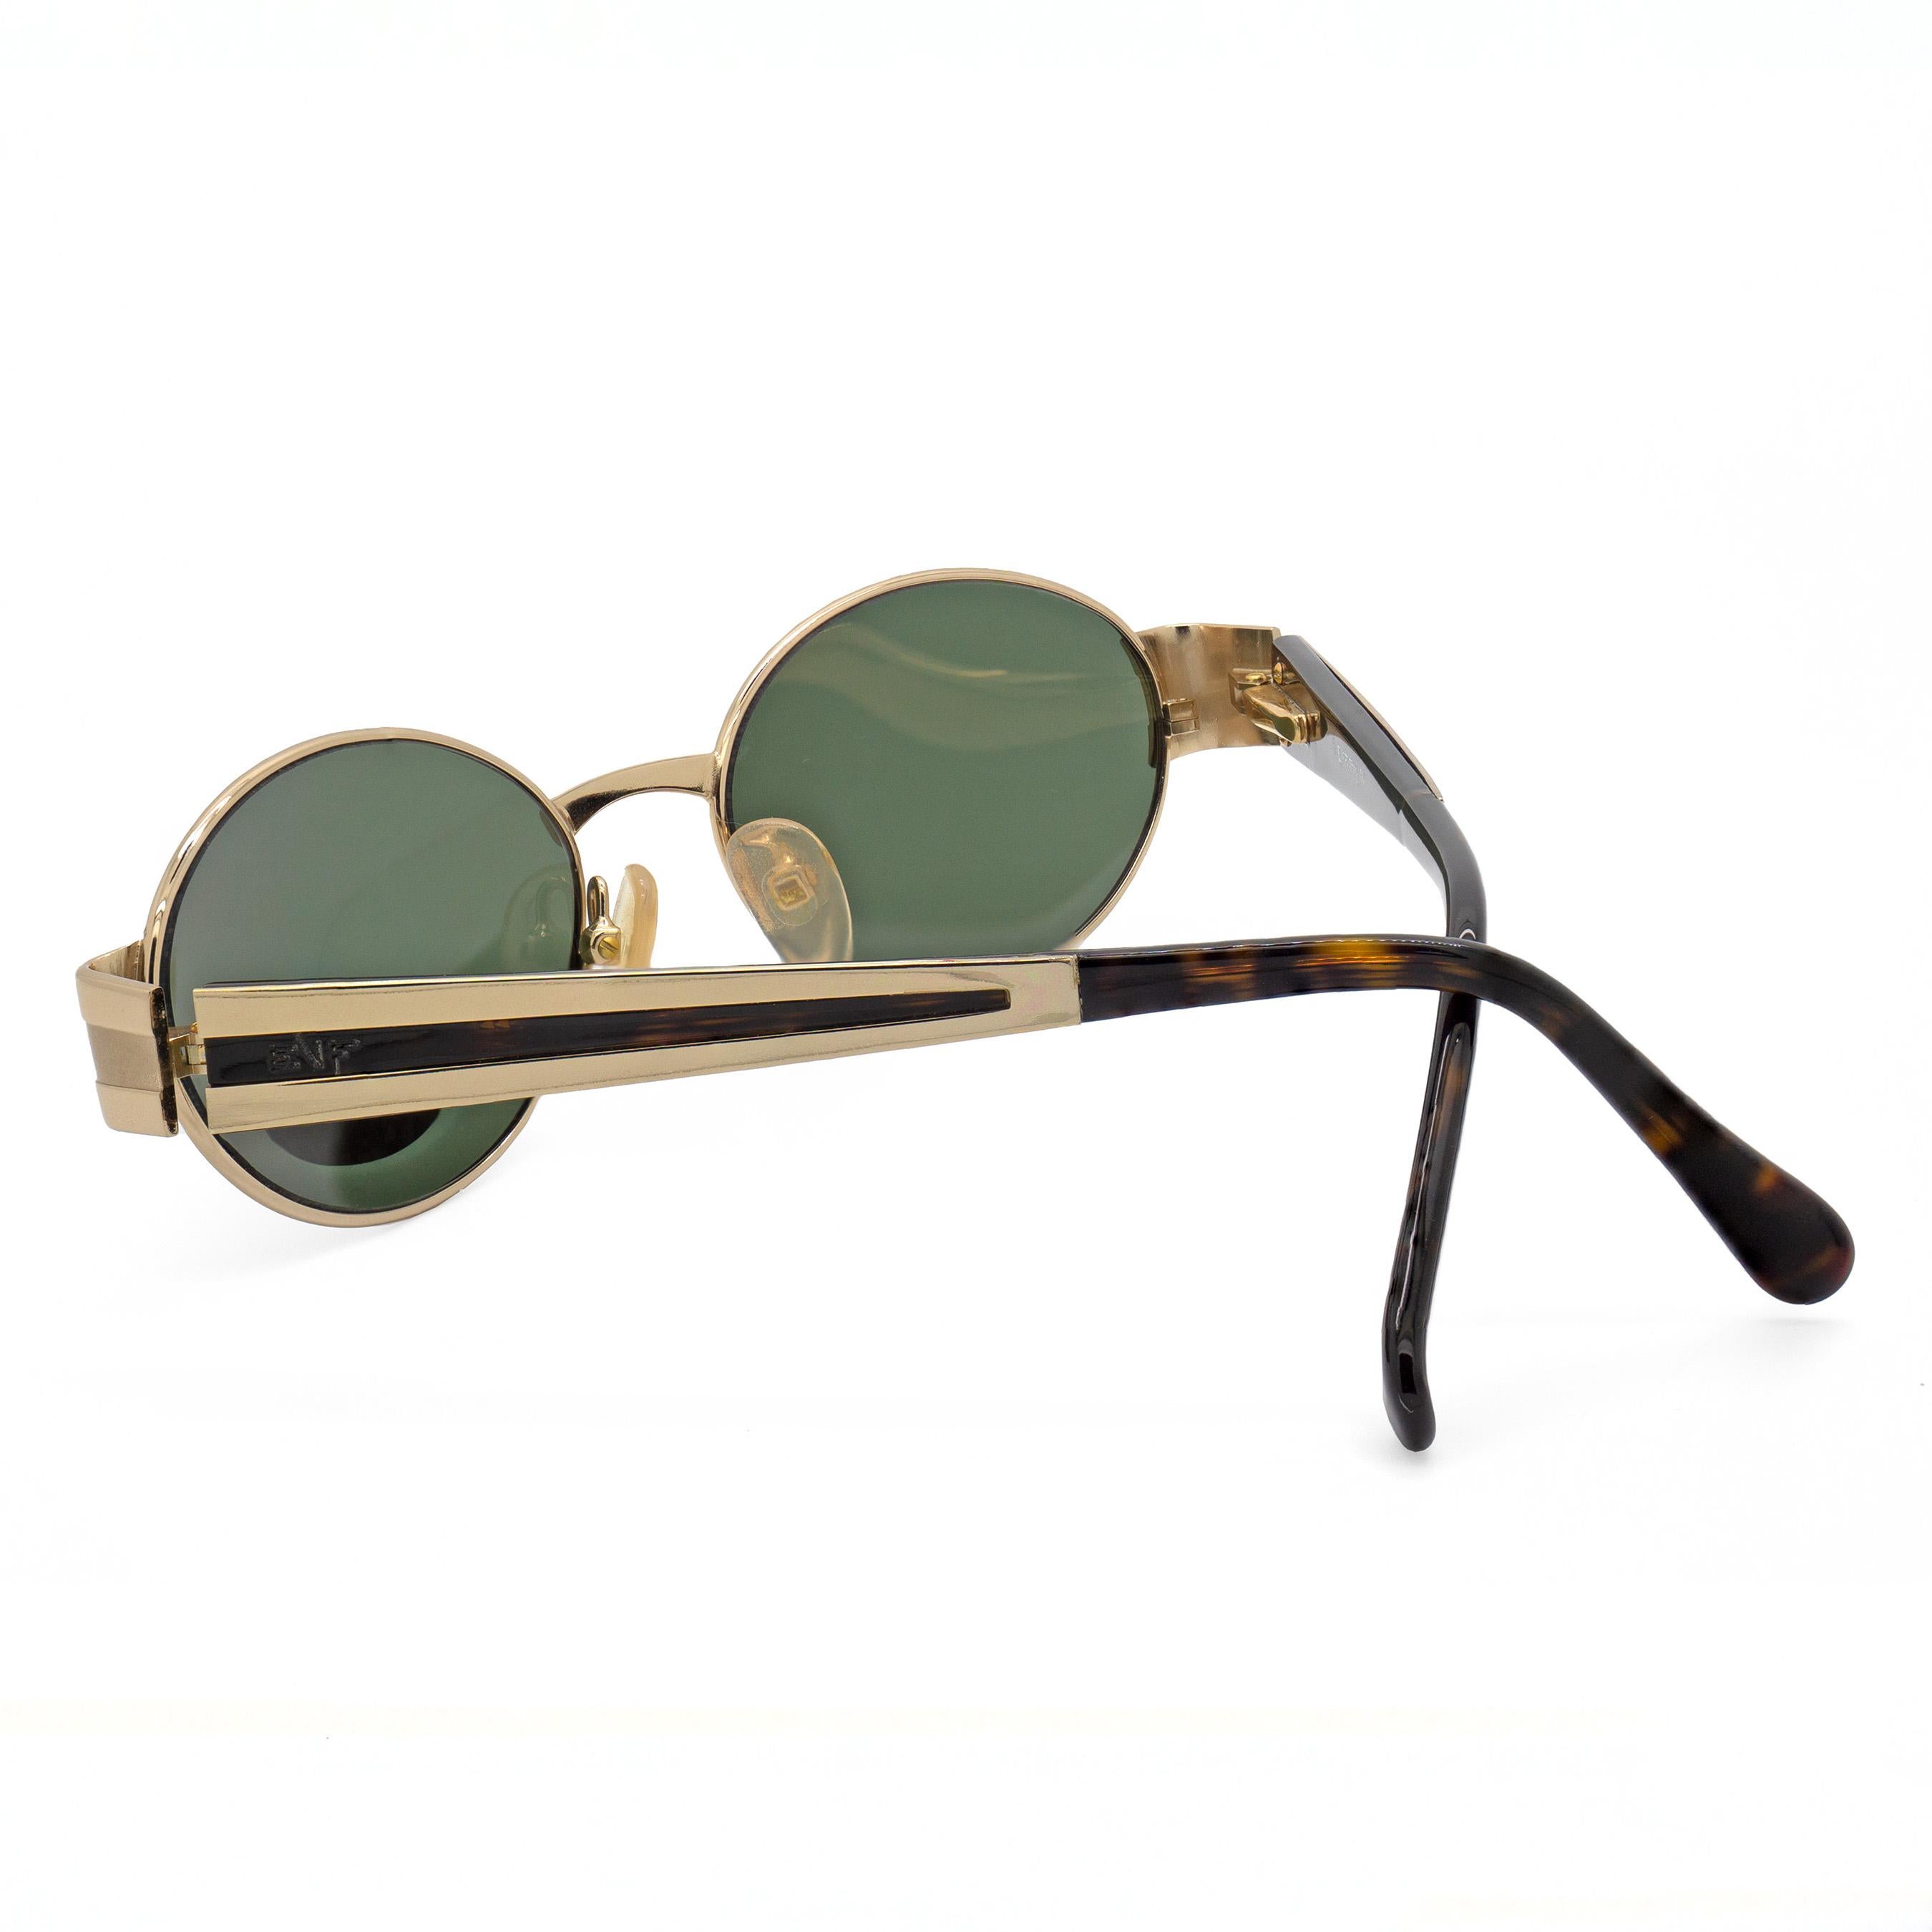 Egon von Furstenberg oval sunglasses spring hinges, made in Italy In New Condition For Sale In Santa Clarita, CA